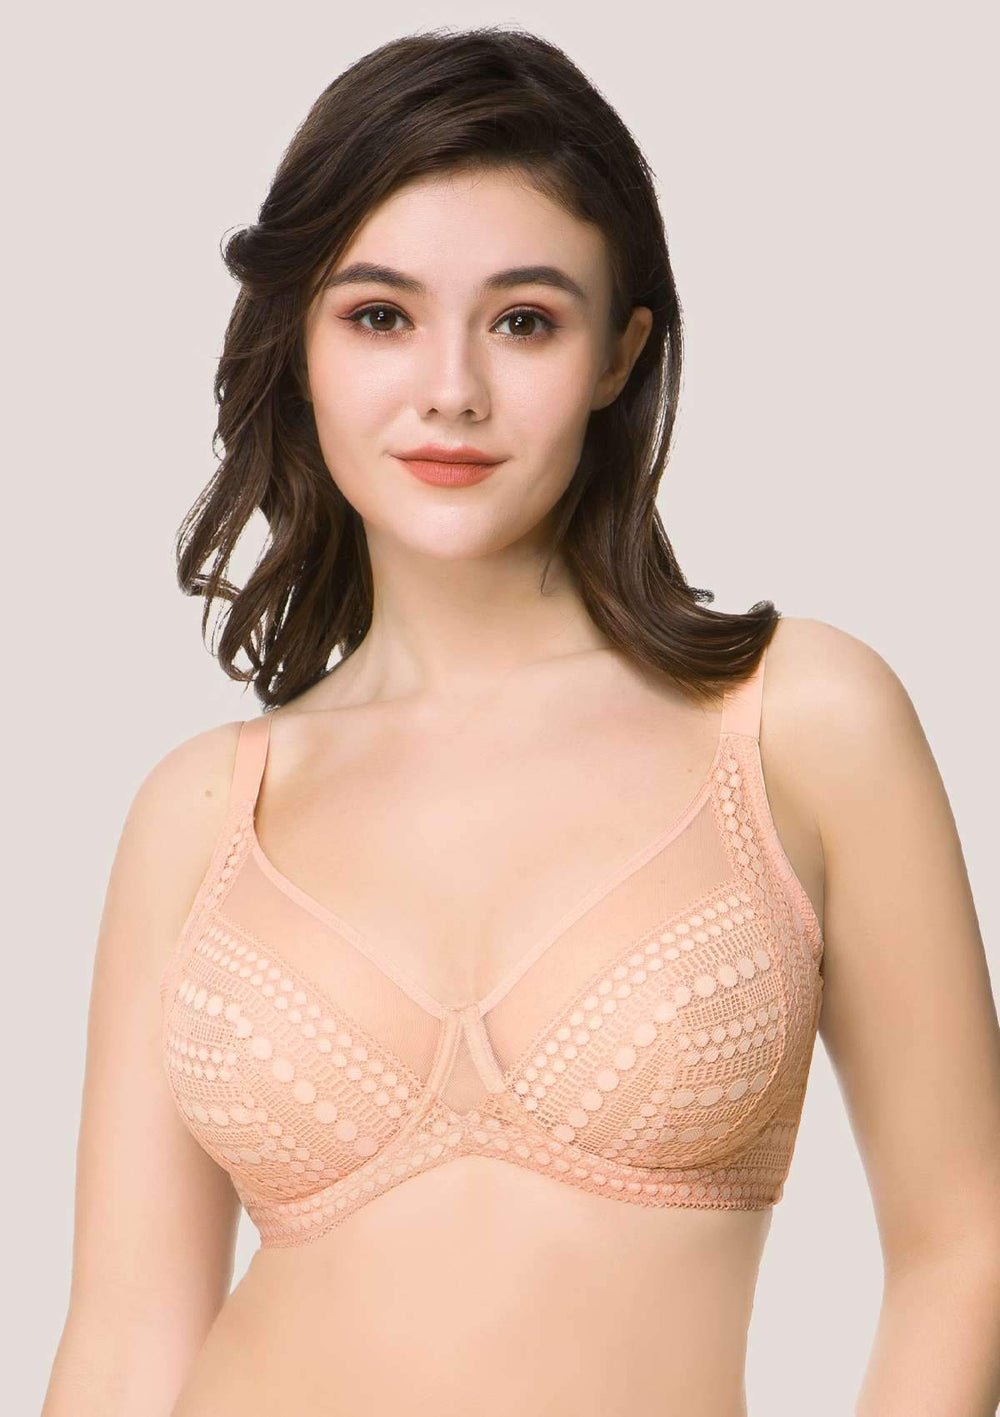 Outlet Express - New! Breezies Lace Seamless Lounge Bra - size 1X (40B, 40C,  38D, 40D, 38DD, 36DDD) • Orig price $23.50, our price $12.99 - Update:  SOLD!